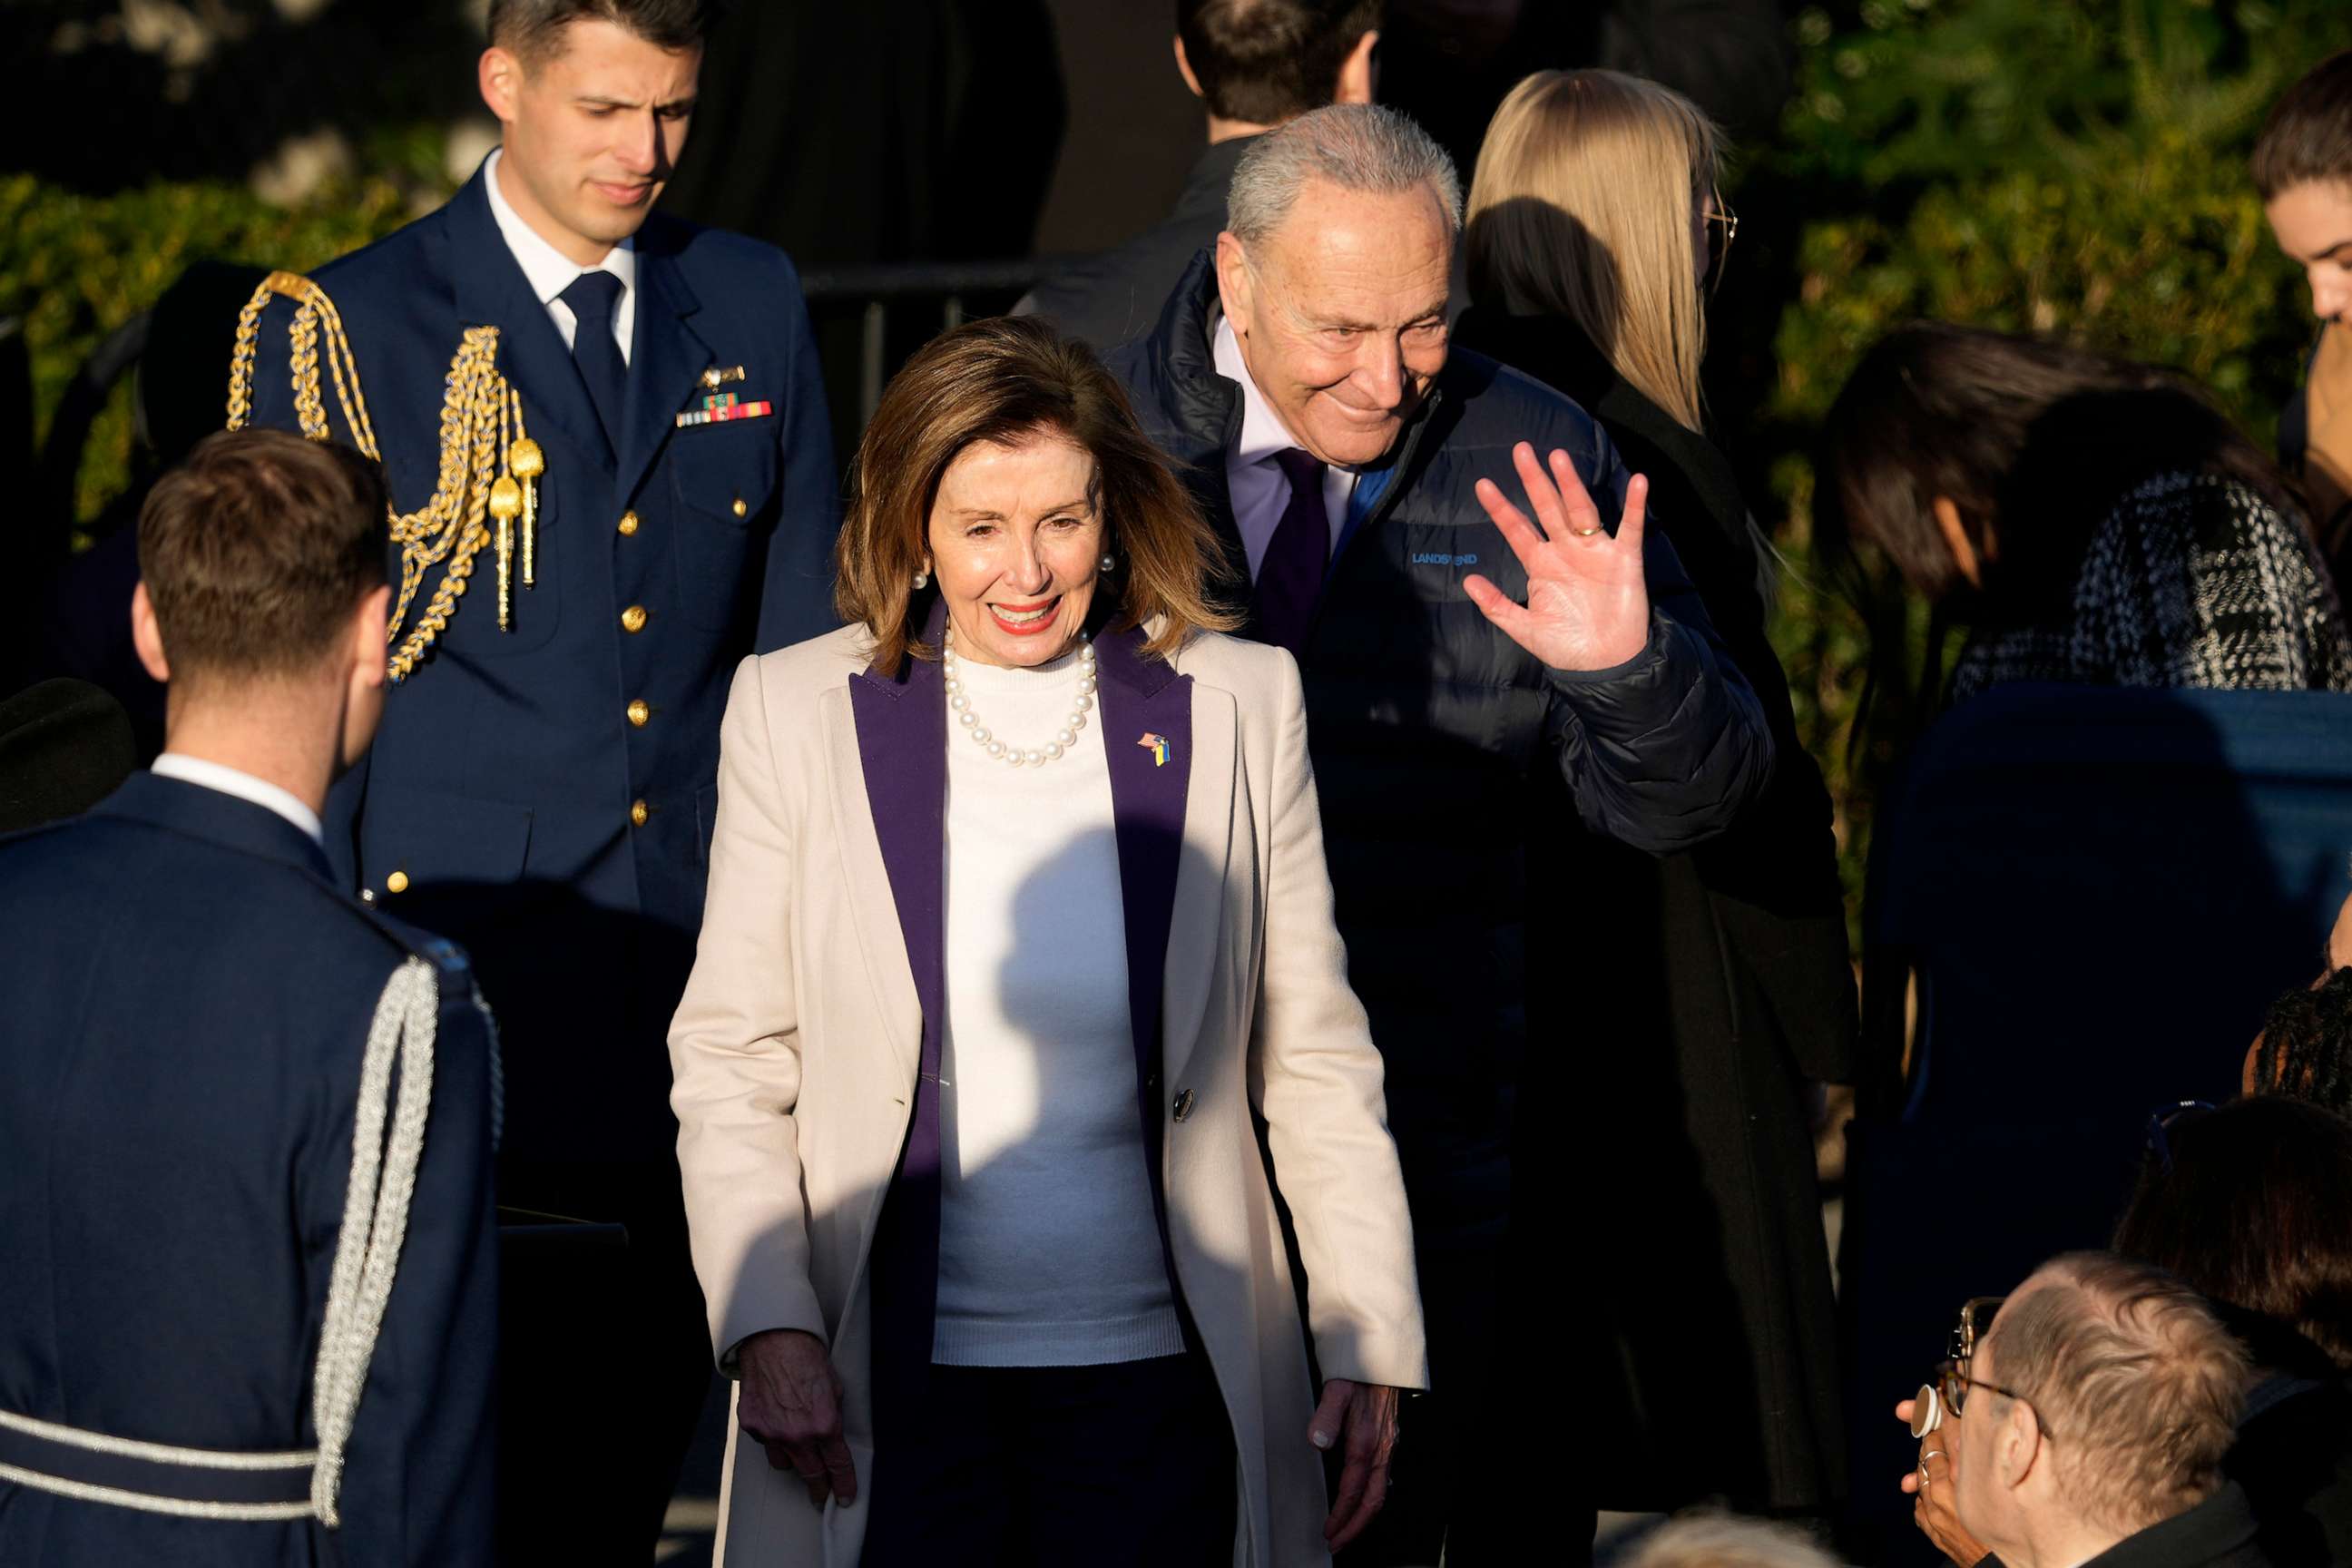 PHOTO: House Speaker Nancy Pelosi and Senate Majority Leader Chuck Schumer arrive before President Joe Biden speaks during a bill signing ceremony for the Respect for Marriage Act, Dec. 13, 2022, on the South Lawn of the White House.